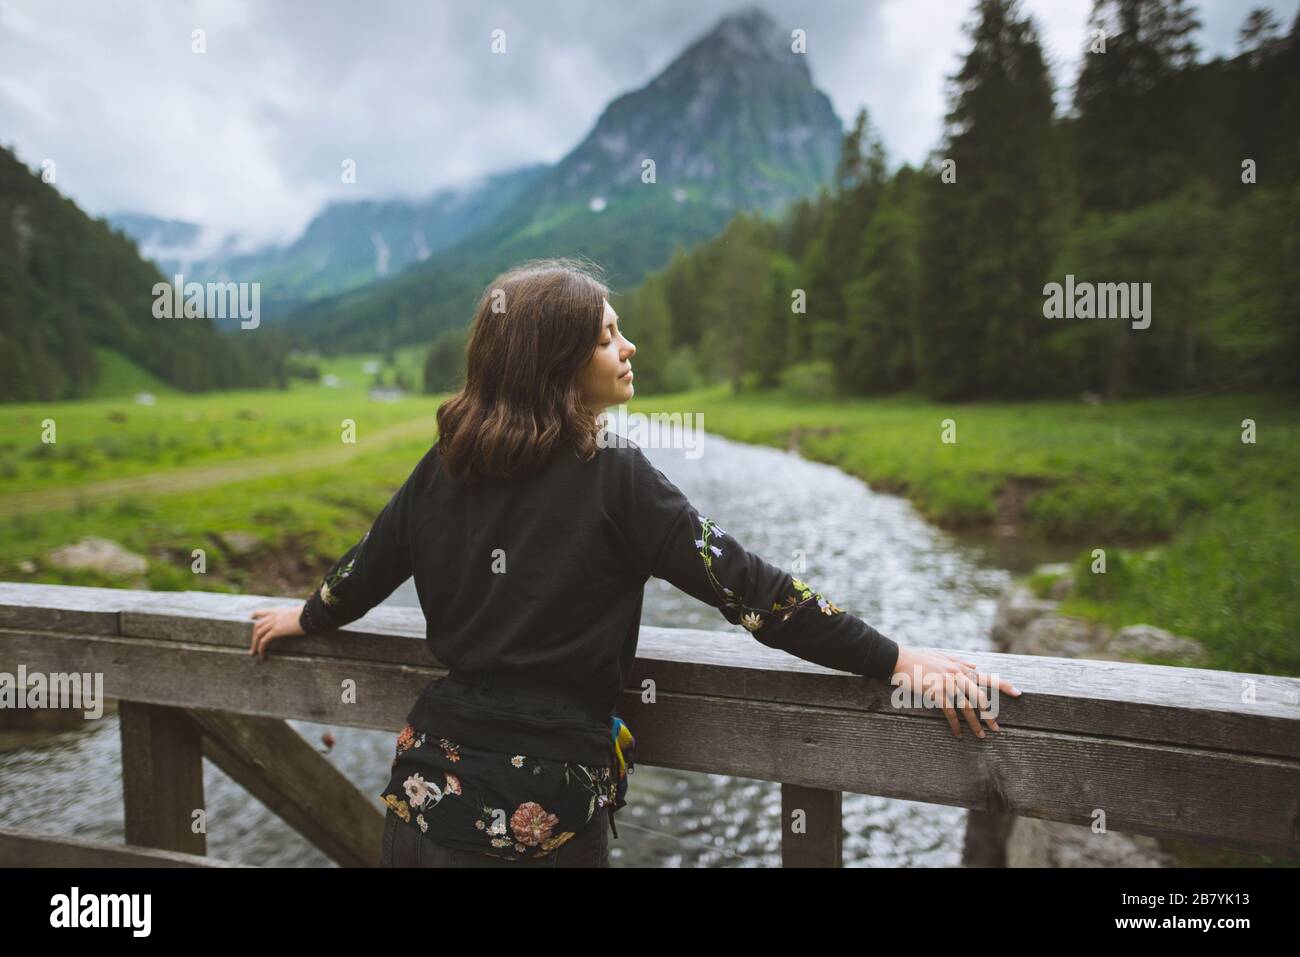 Young woman leaning on railing by river Stock Photo